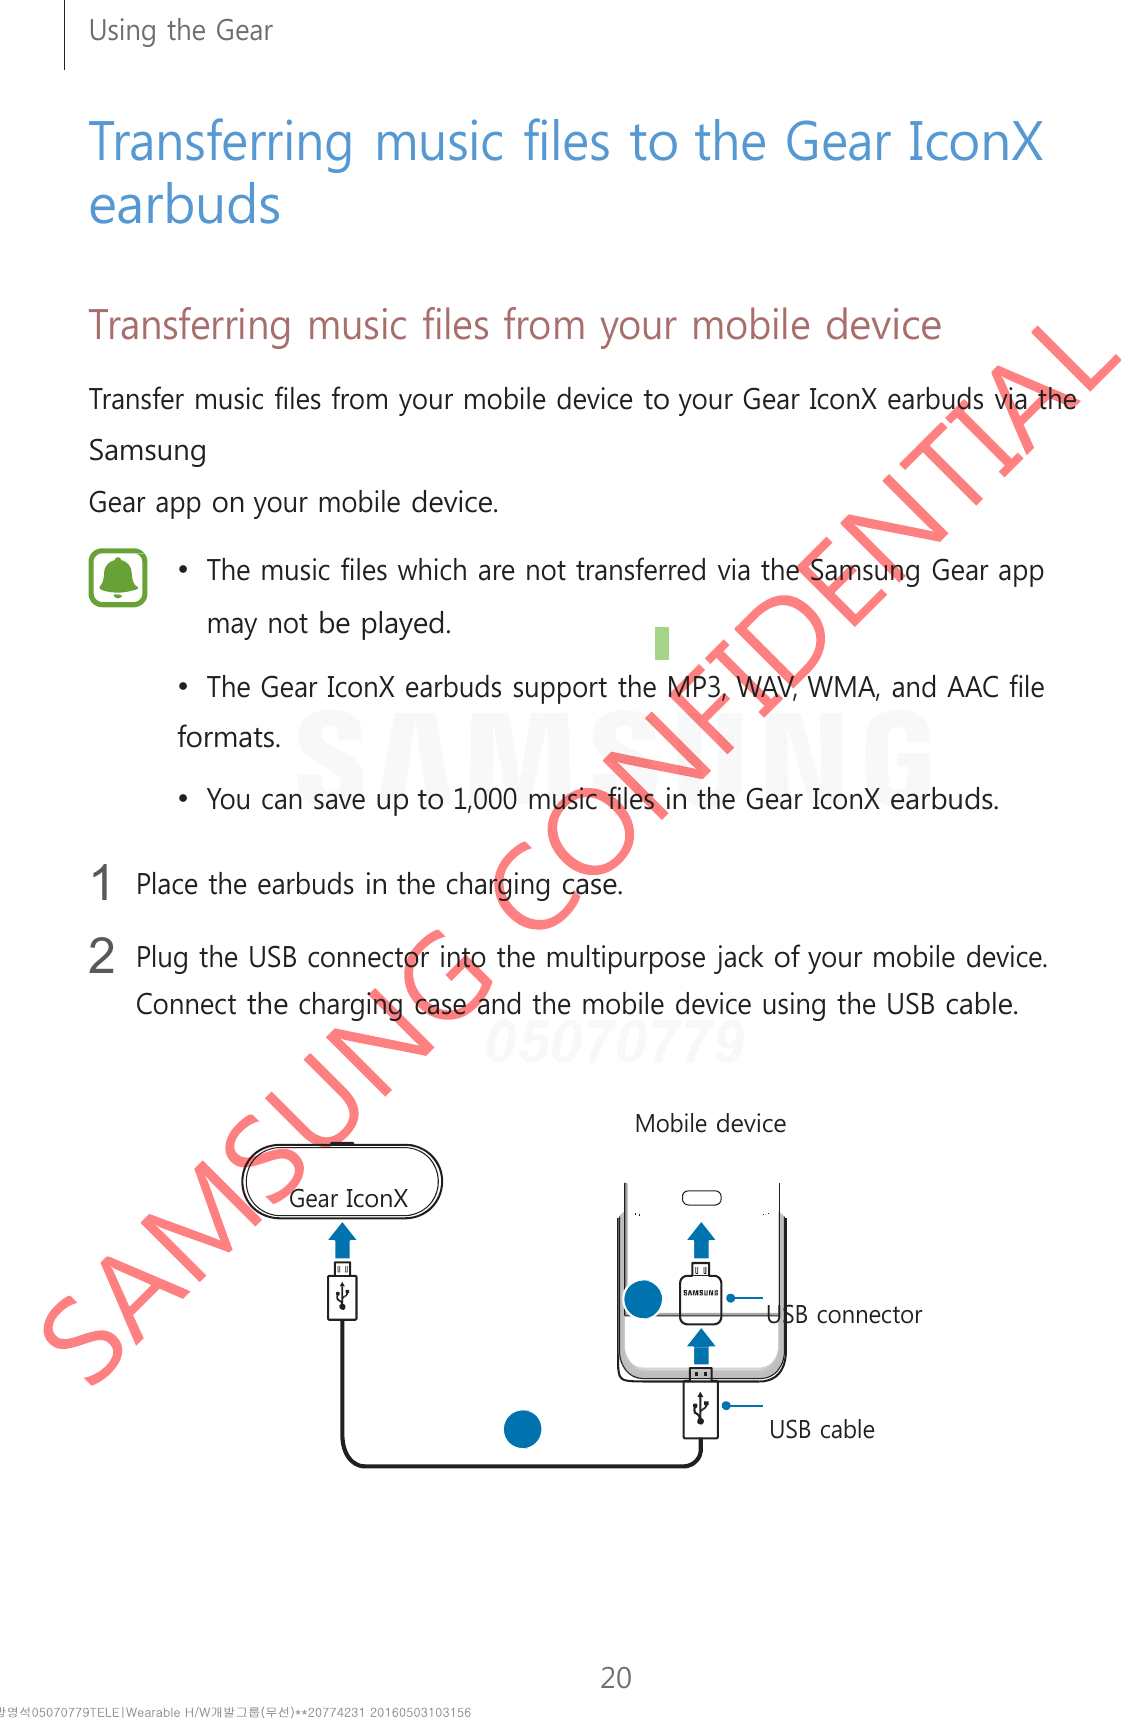 20Using the Gear      Transferring music files to the Gear IconX earbuds   Transferring music files from your mobile device  Transfer music files from your mobile device to your Gear IconX earbuds via the Samsung Gear app on your mobile device.  • The music files which are not transferred via the Samsung Gear app may not be played. • The Gear IconX earbuds support the MP3, WAV, WMA, and AAC file formats. • You can save up to 1,000 music files in the Gear IconX earbuds.  1 Place the earbuds in the charging case.  2 Plug the USB connector into the multipurpose jack of your mobile device. Connect the charging case and the mobile device using the USB cable.     Mobile device   Gear IconX     USB connector     USB cable 